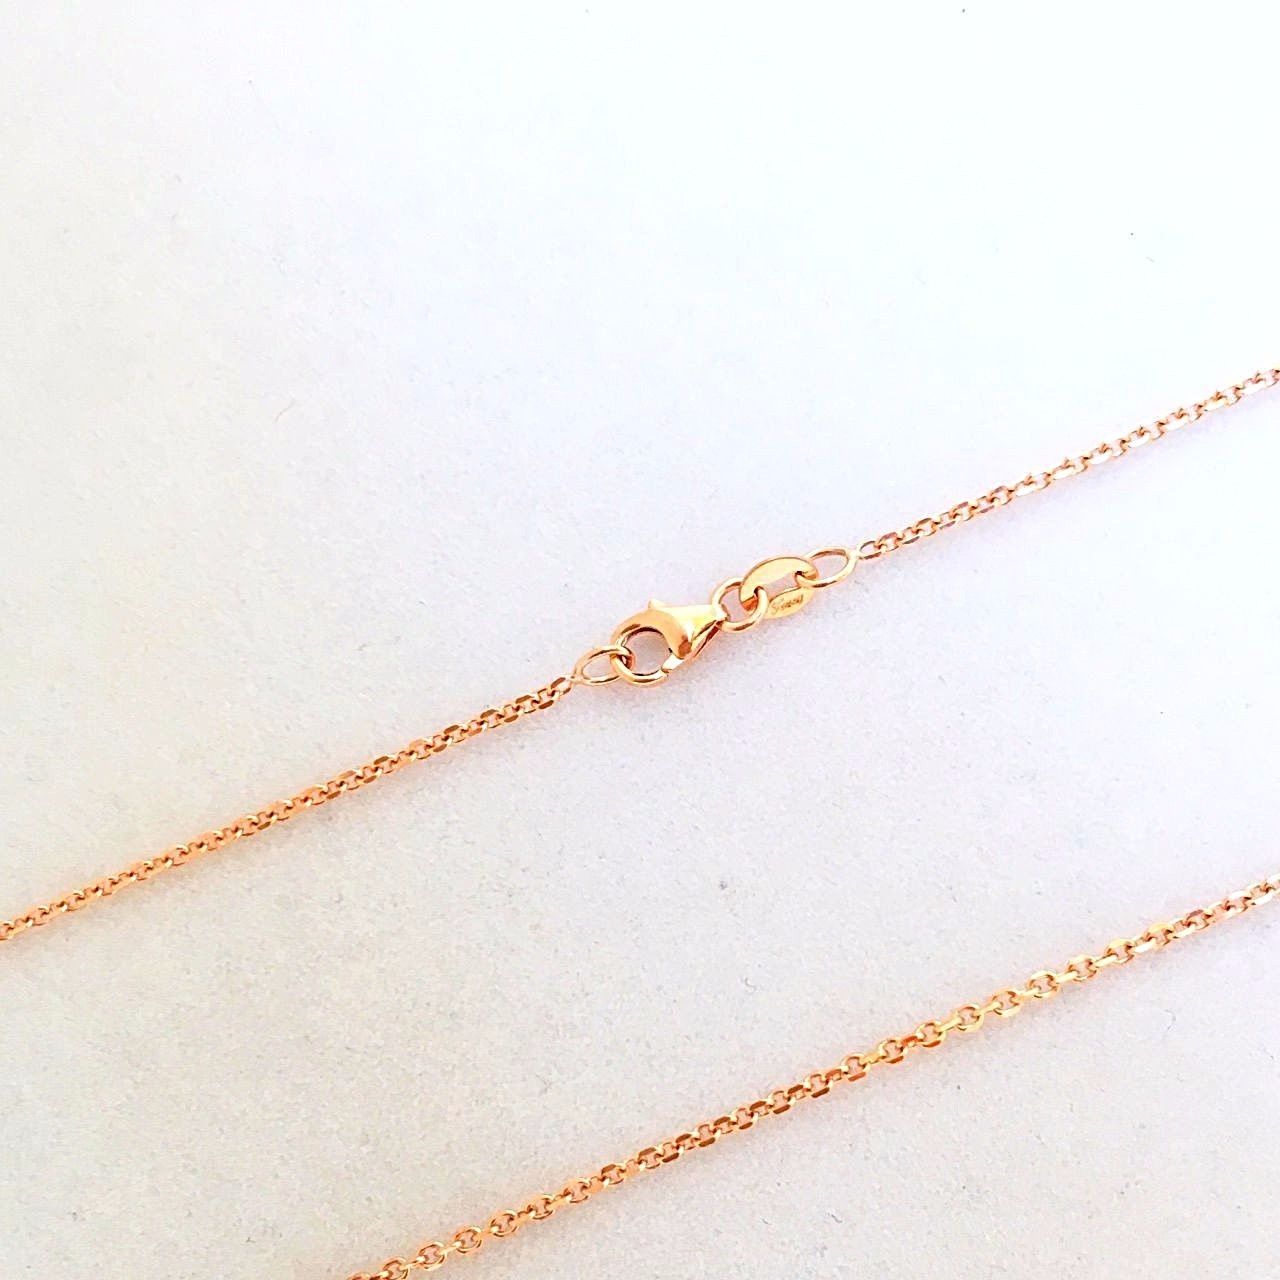 20 inch 14K rose gold cable chain with lobster clasp 2.8 grams $390